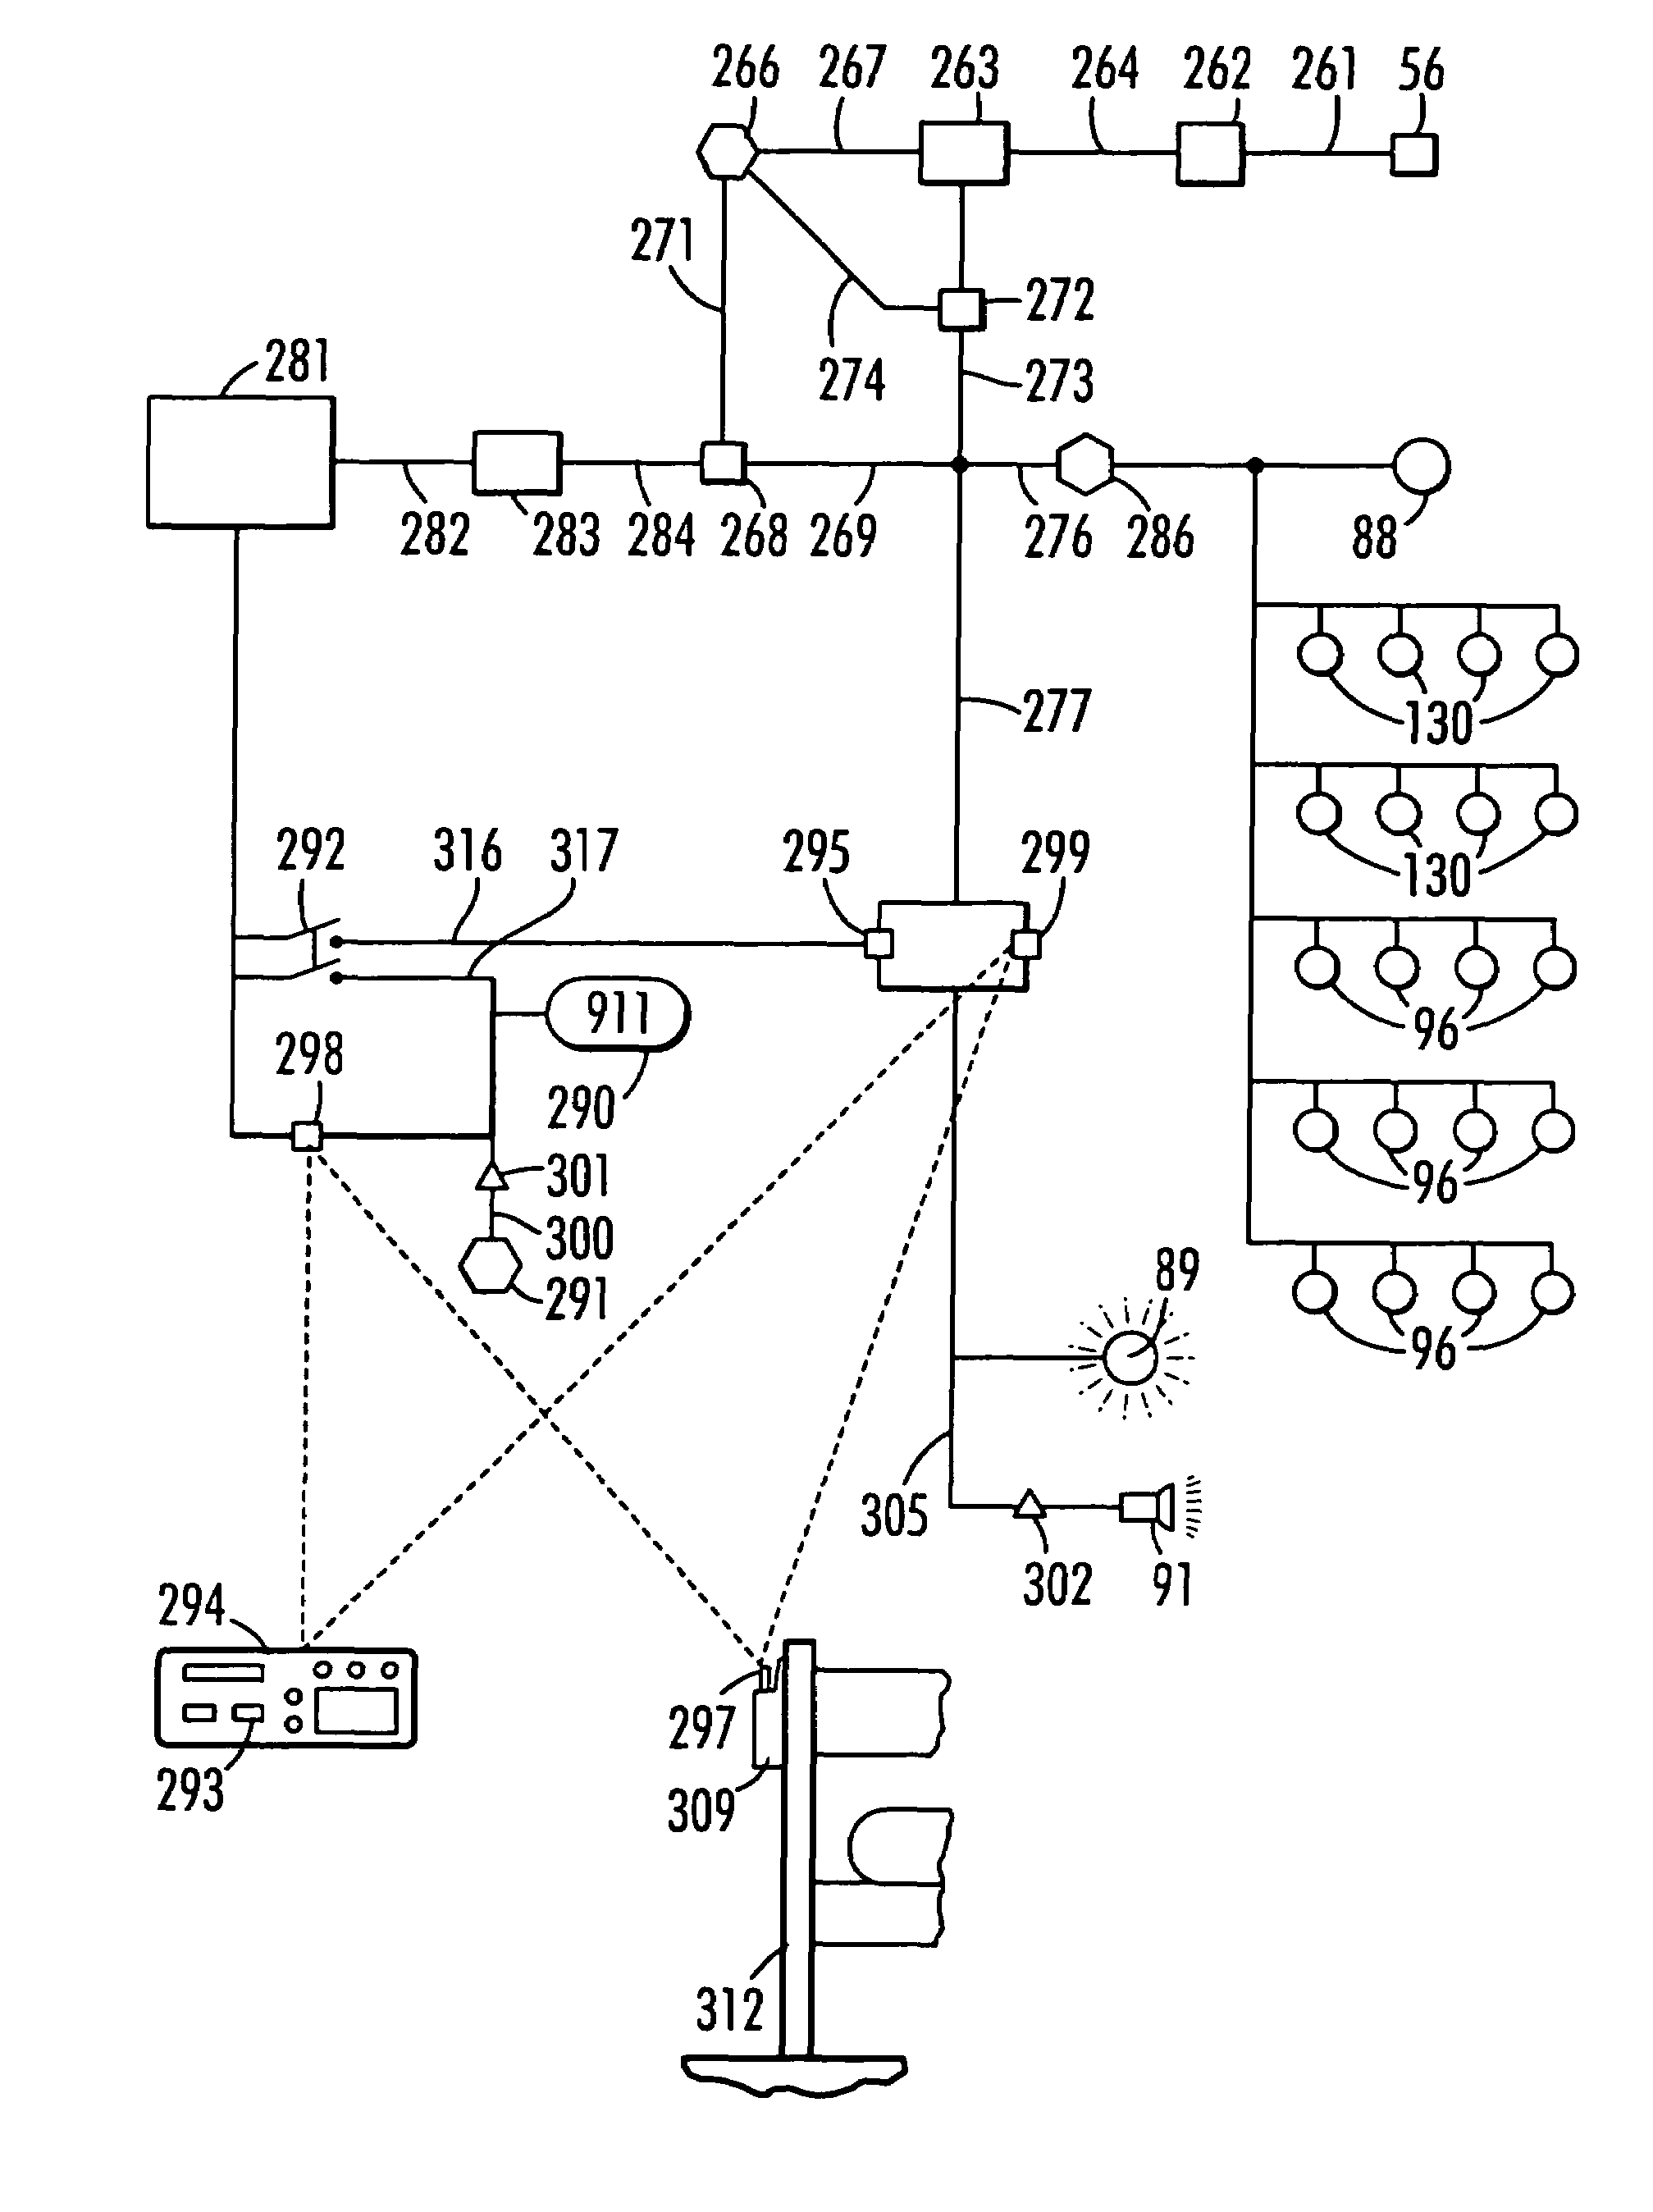 Mailbox support with lighted residence identification and alert signal apparatus